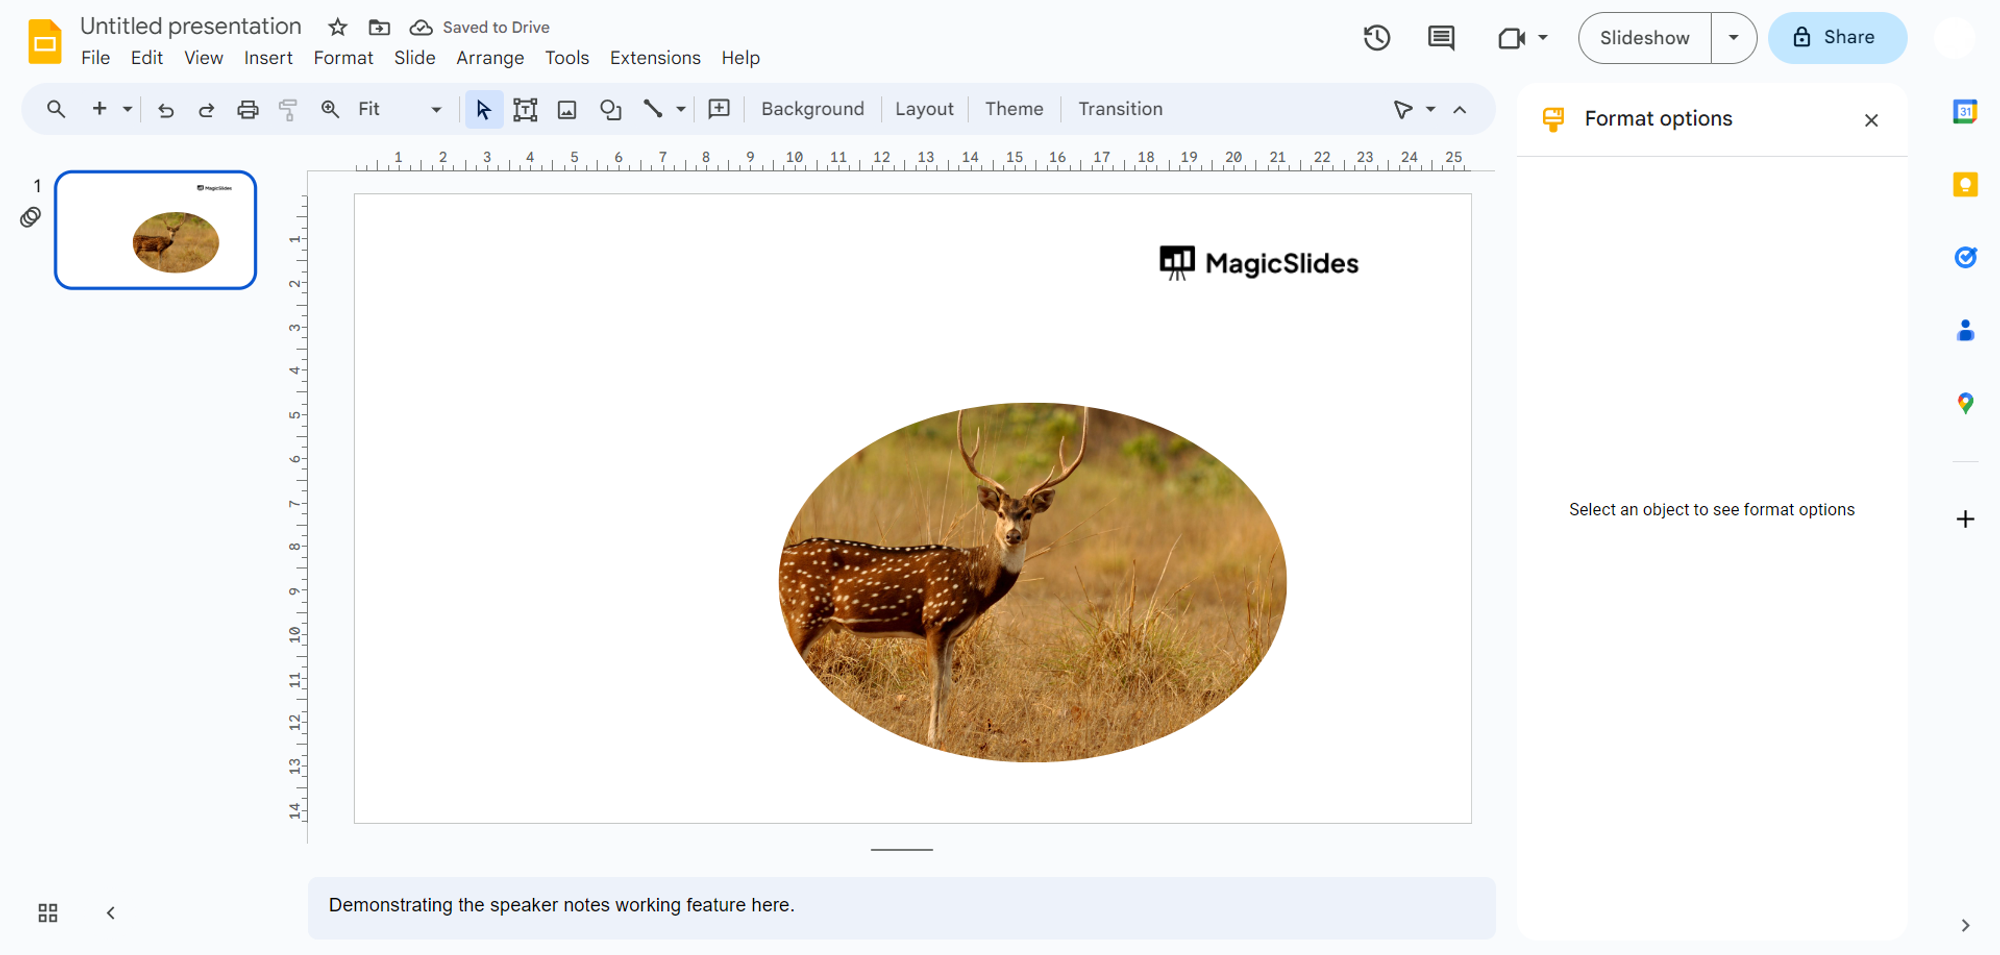 How to Fit an Image in Shape on Google Slides on Mobile and PC